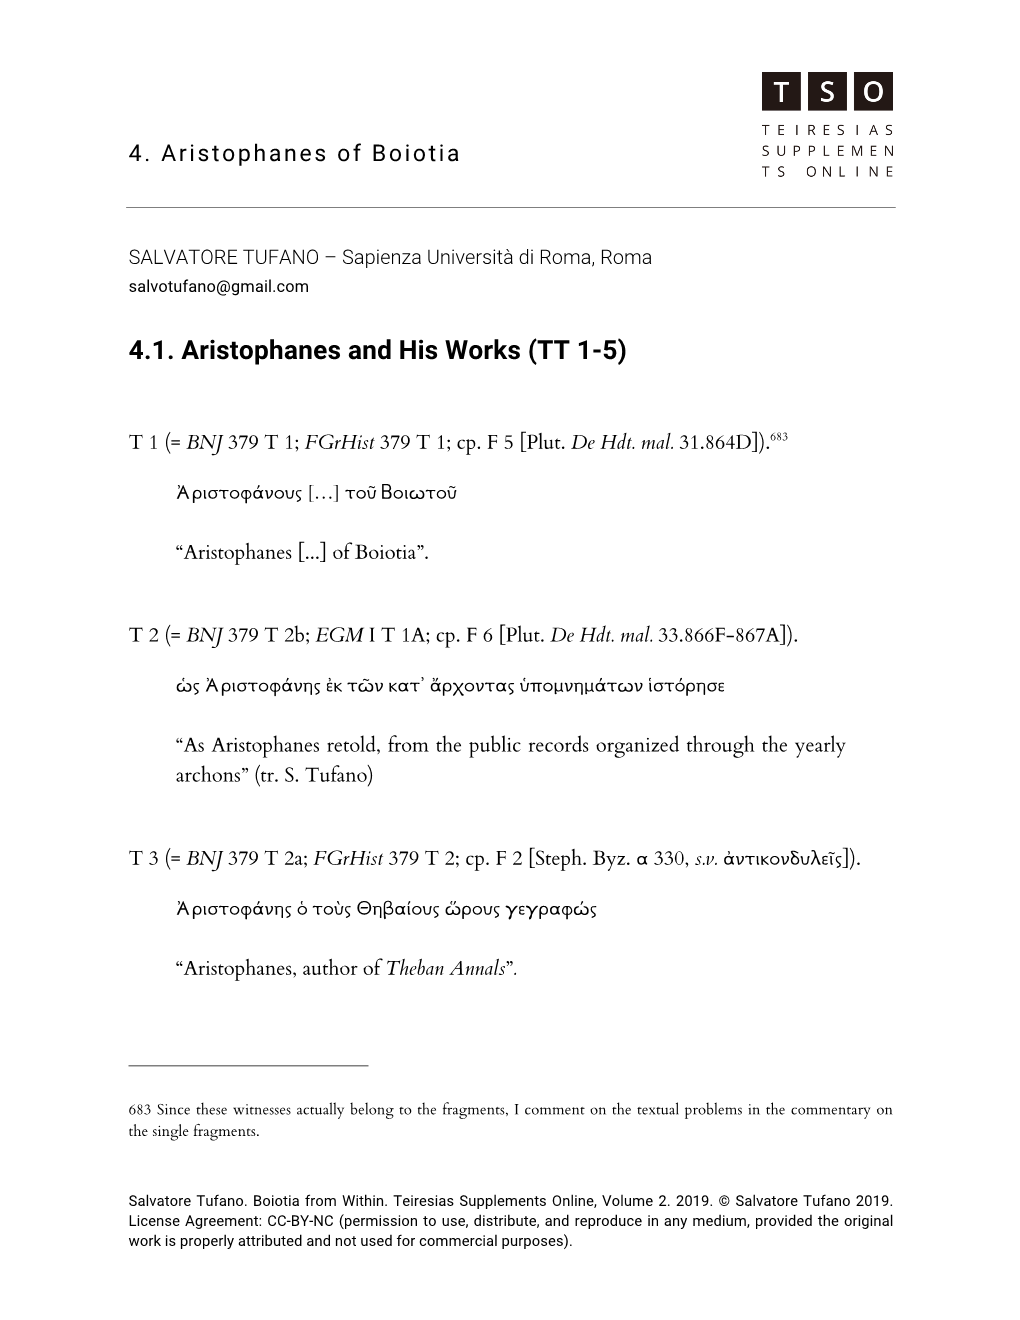 4.1. Aristophanes and His Works (TT 1-5)